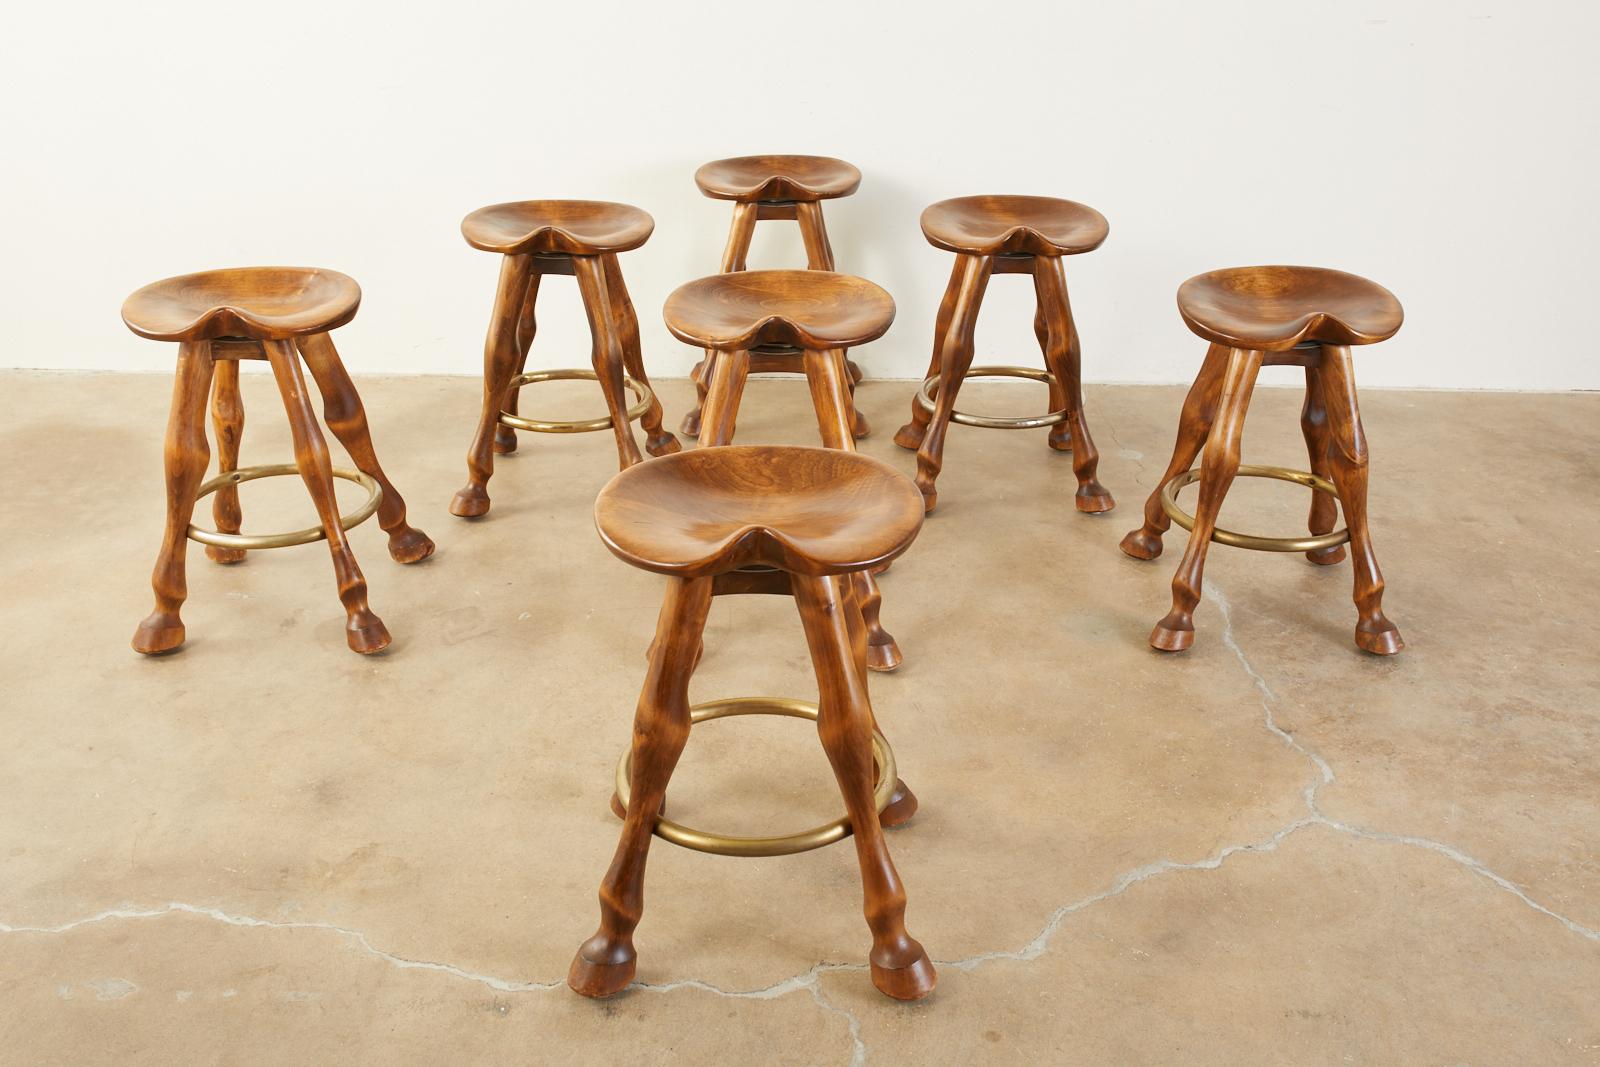 Rustic set of seven carved barstools with saddle shaped seats. The stools are counter height (24.5 inches) tall and feature horse legs ending with hoof feet. Made in the Western Americana style showcasing the rich oakwood grains and rich finish. The